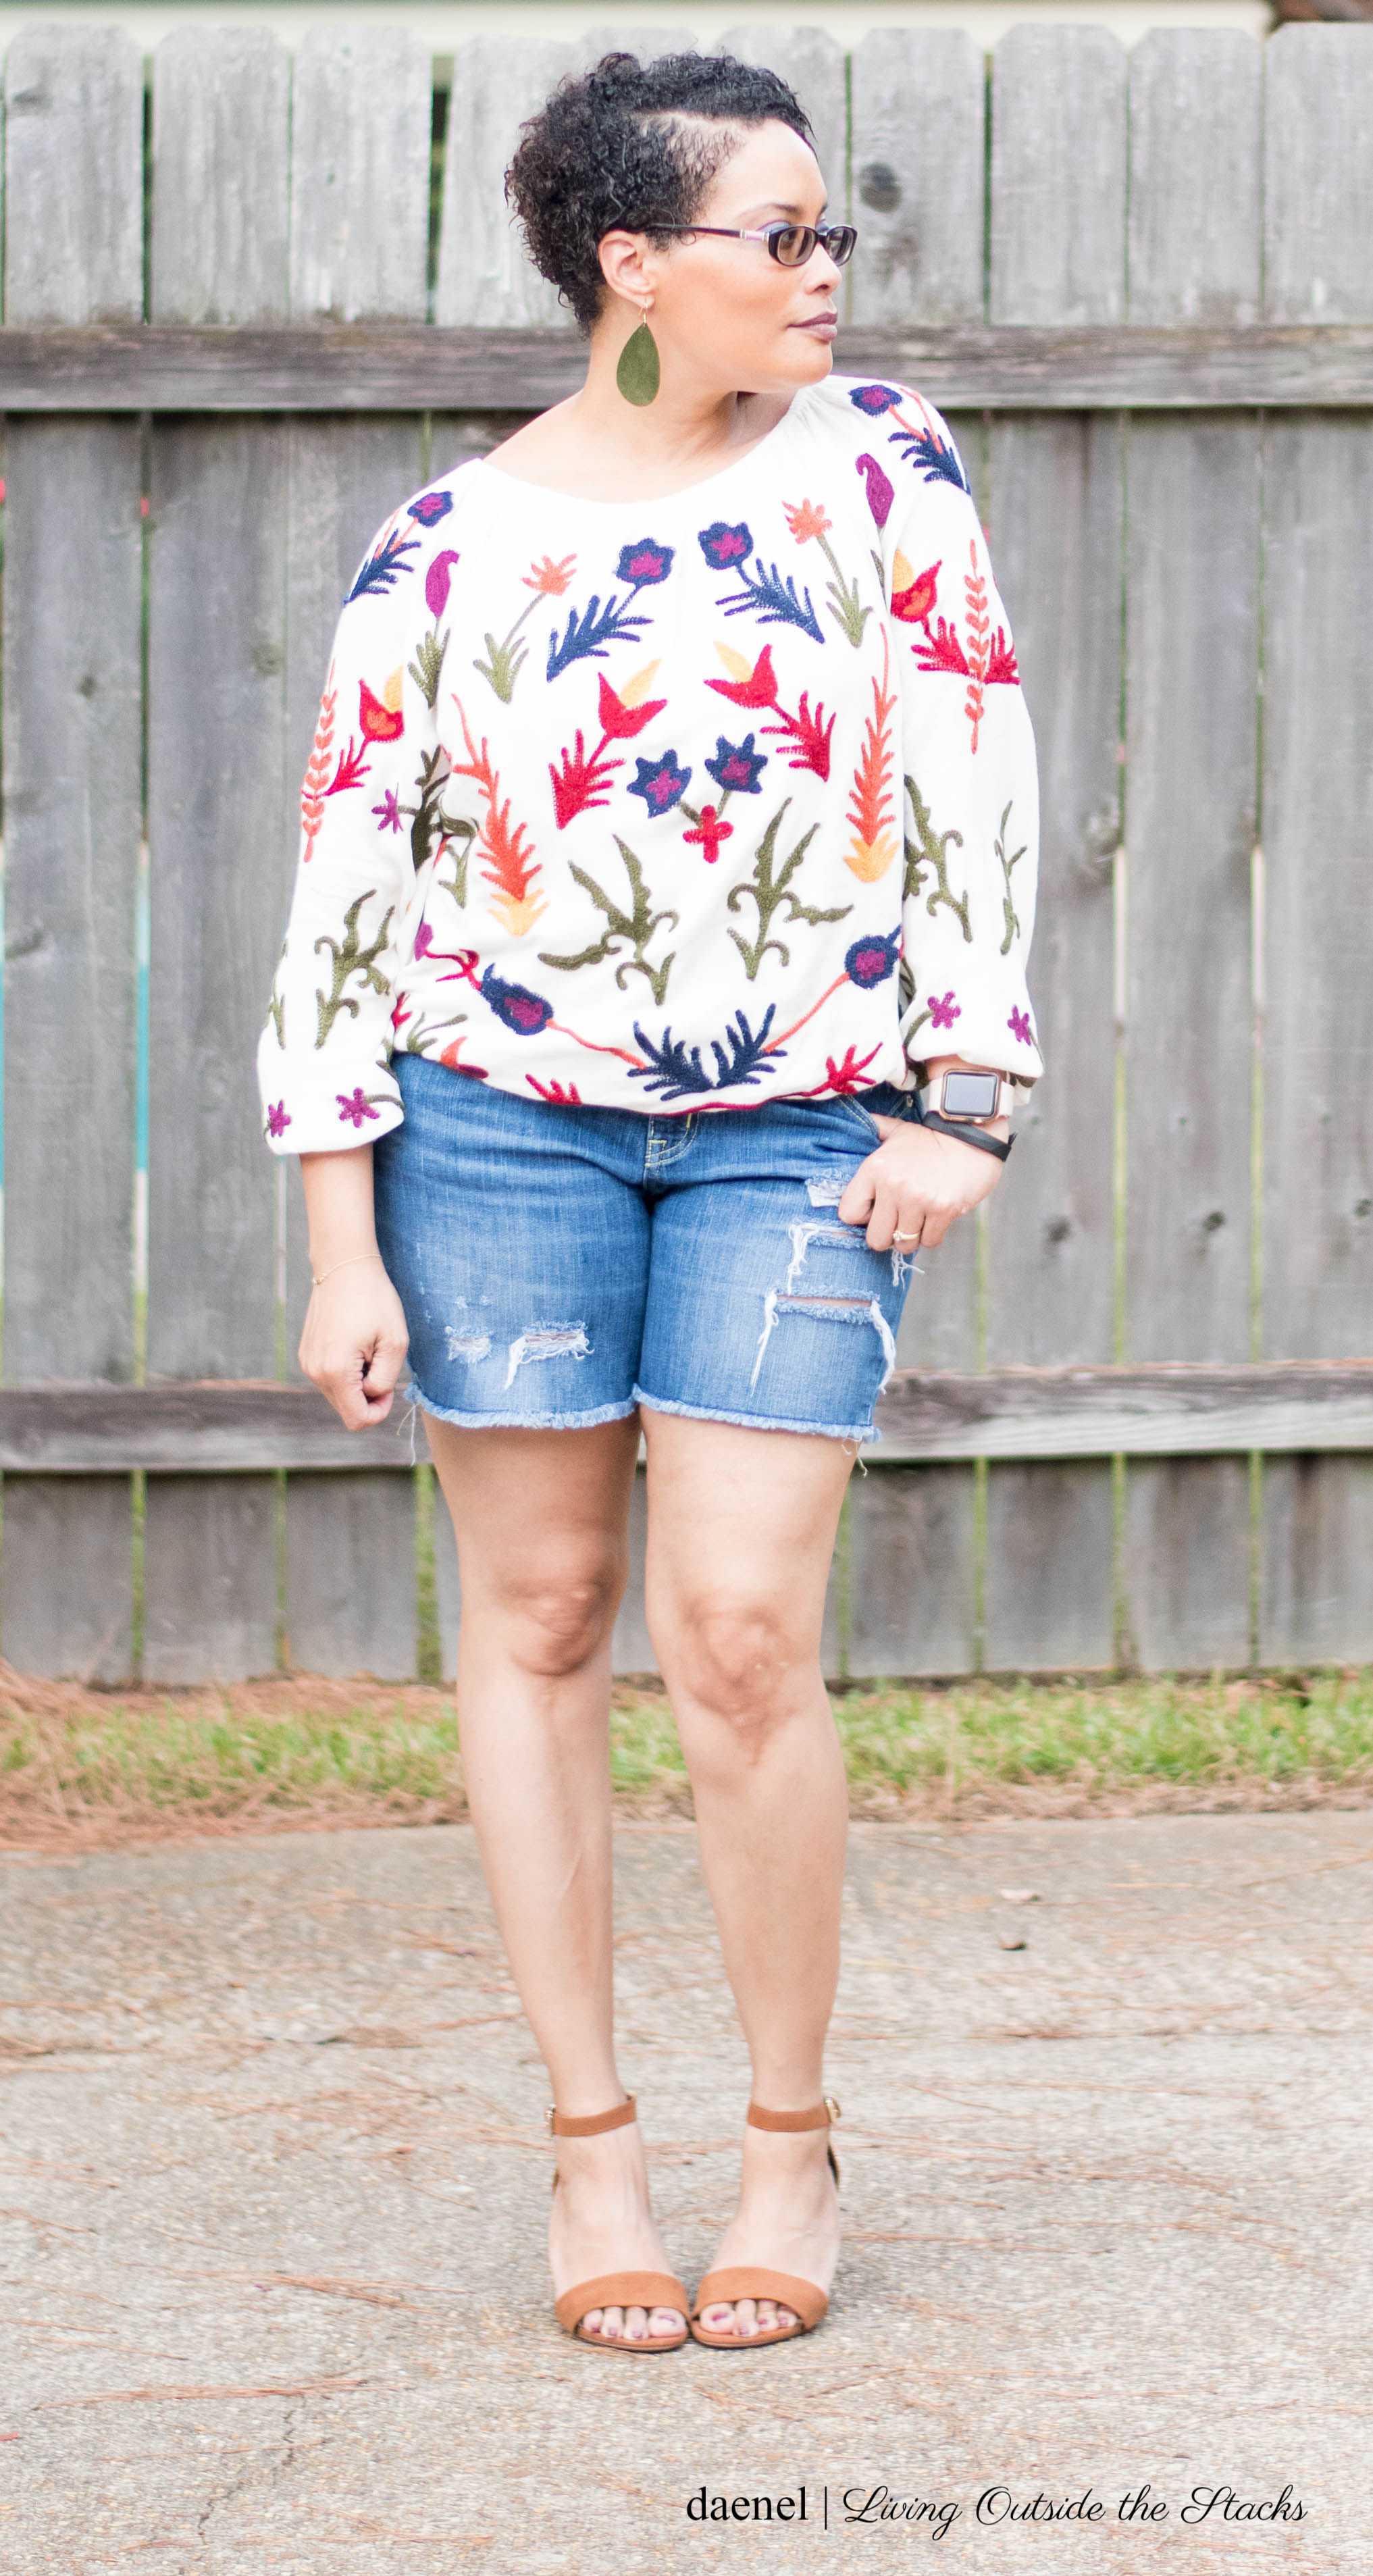  Embroidered Boho Top by Laurie Felt Distressed Denim Shorts from Target and Camel Sandals from Zulily {living outside the stacks}